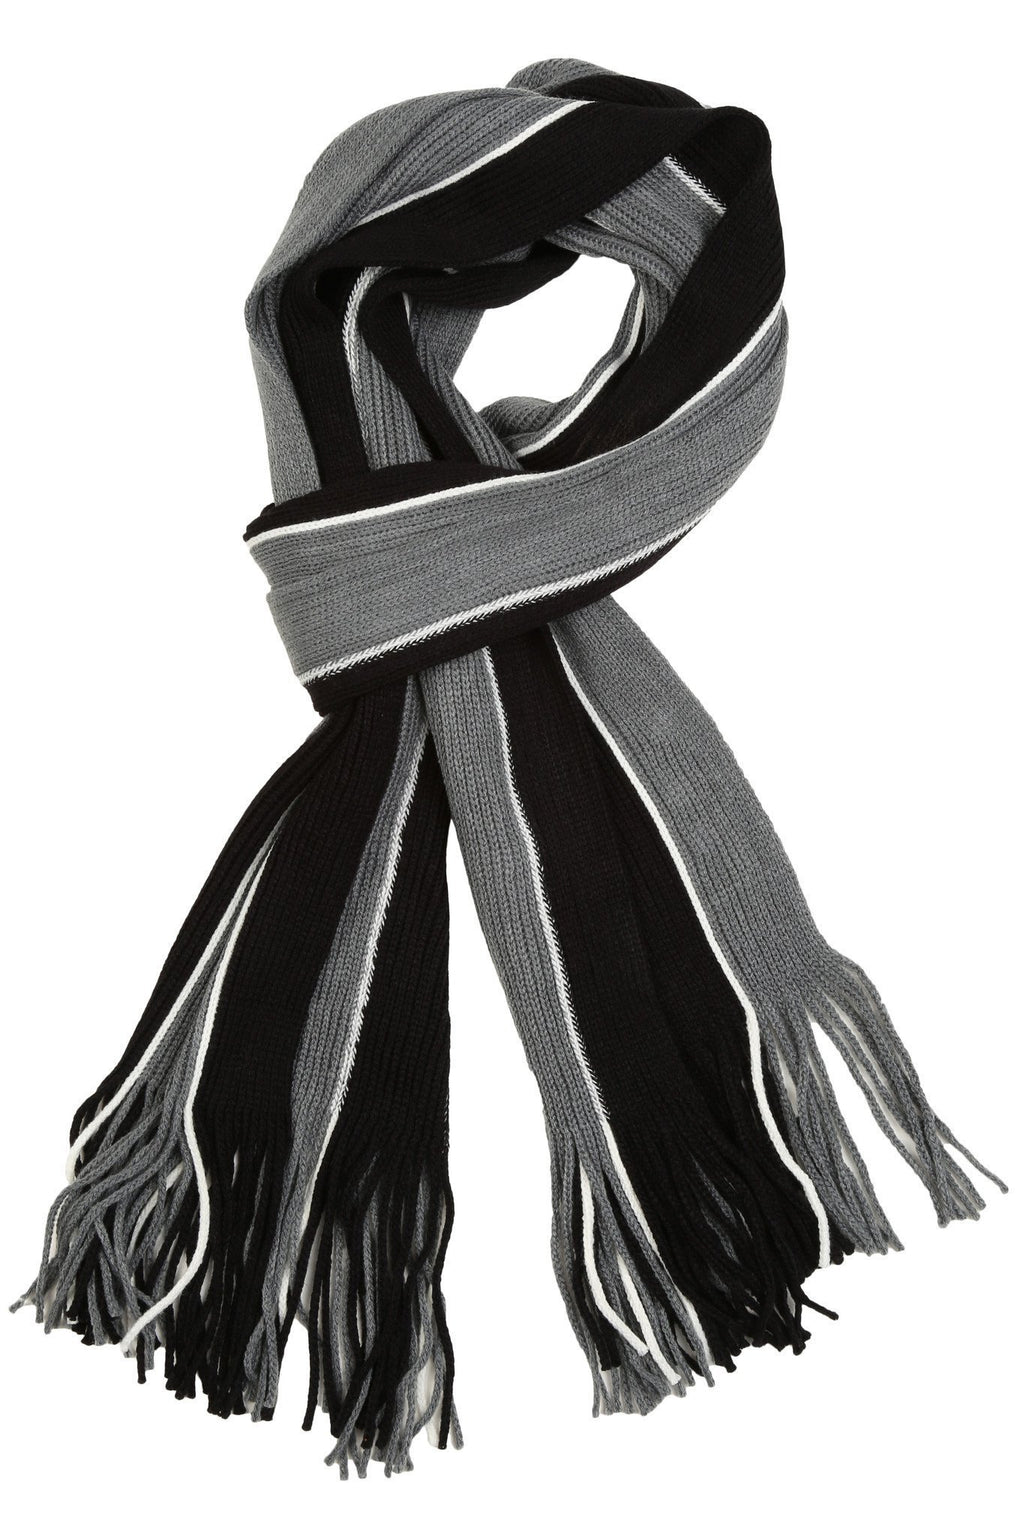 Mens Winter Scarf Striped Color with Fringe